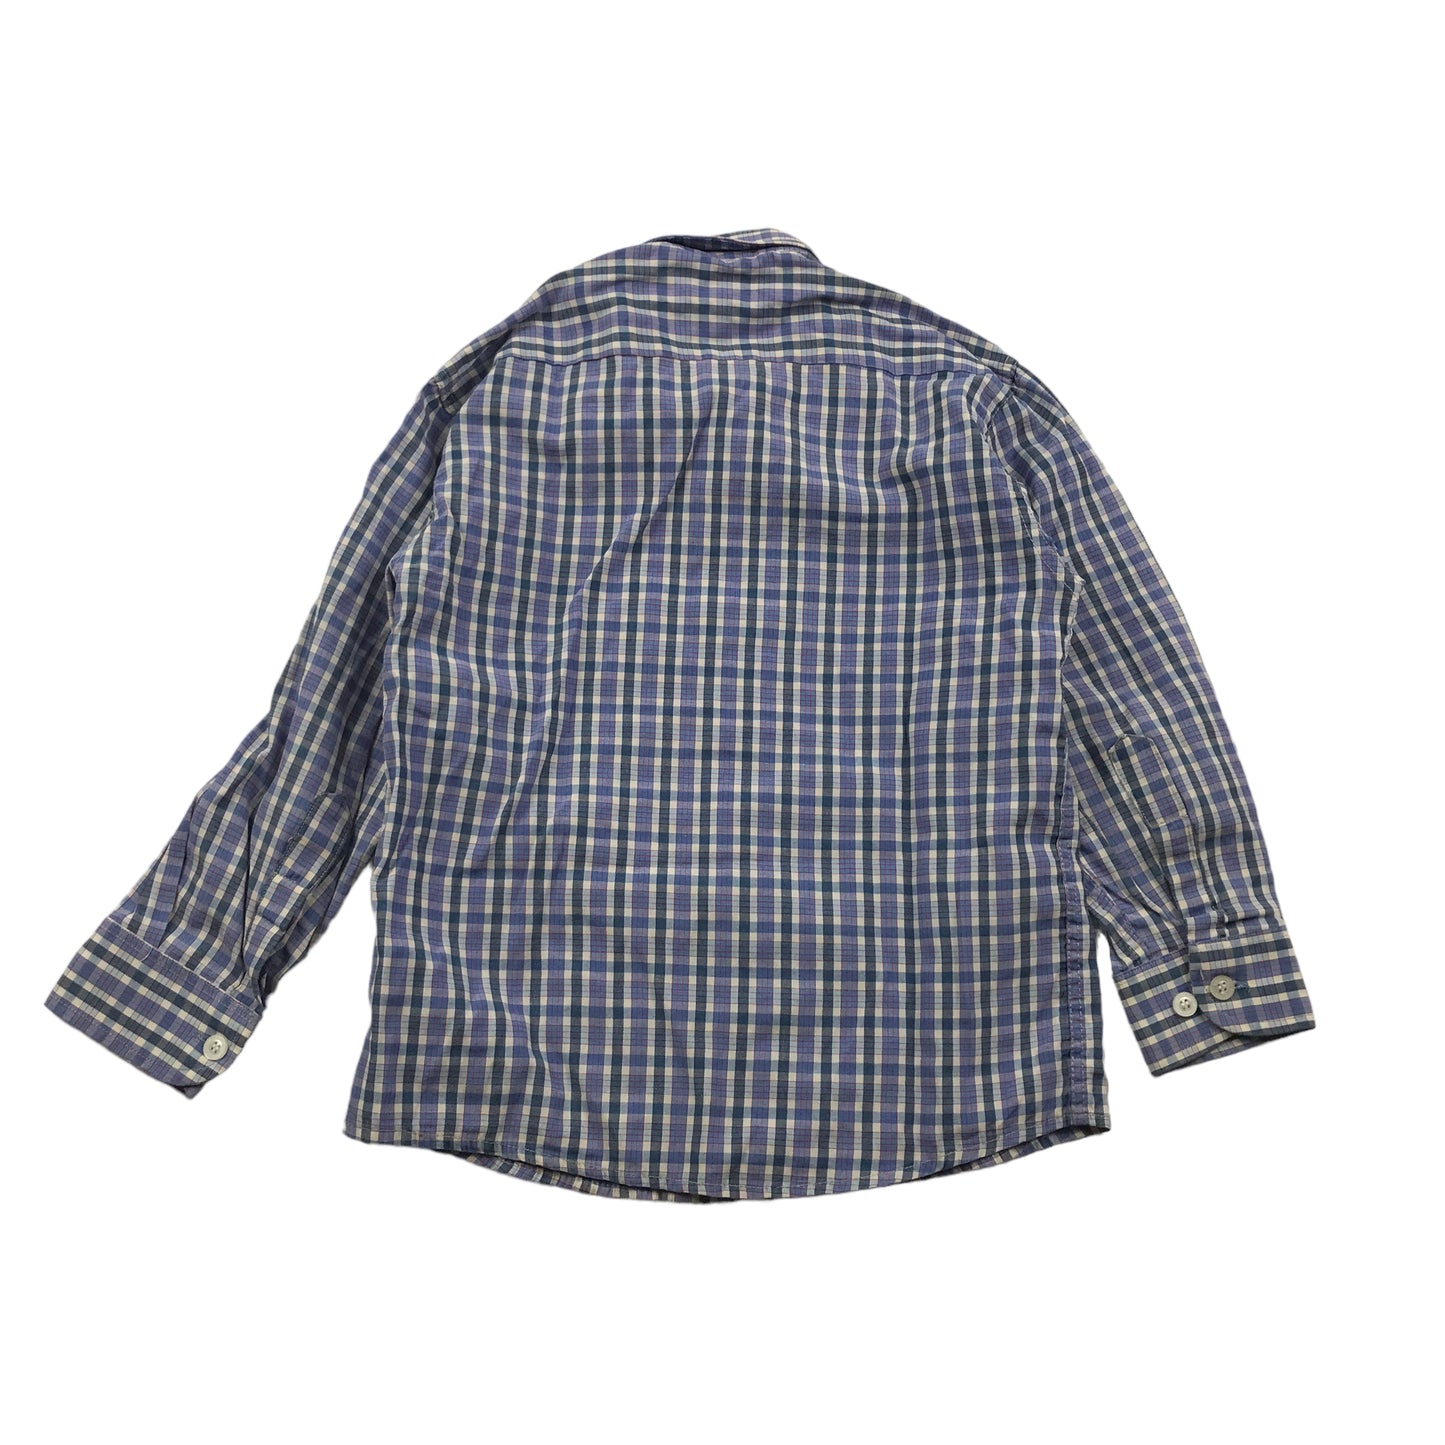 Blue and White Checked Shirt Age 5-6